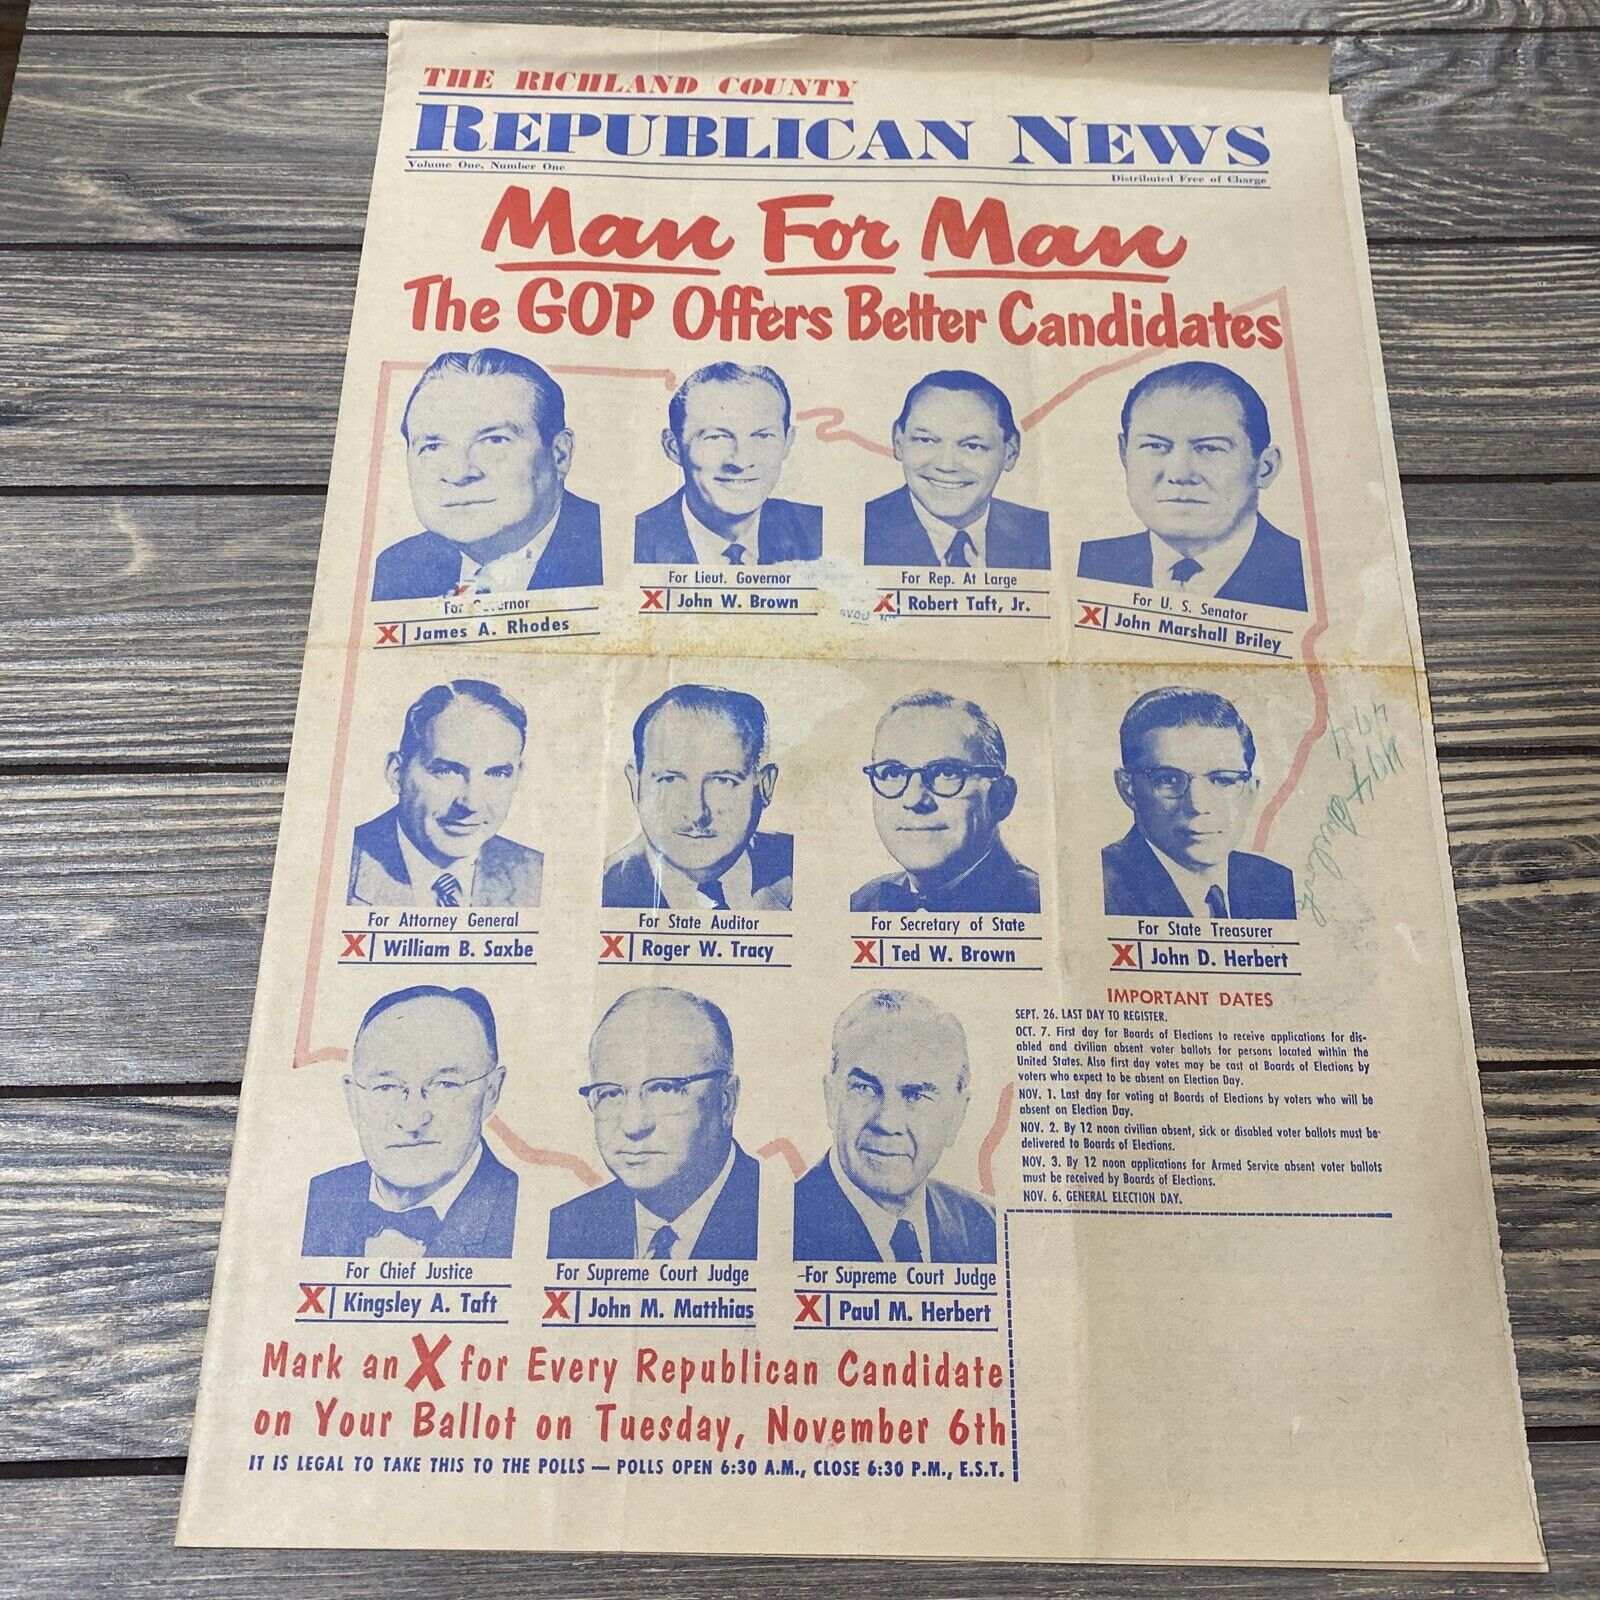 Vintage The Richland County Republican News Volume One Number One Man For Man 